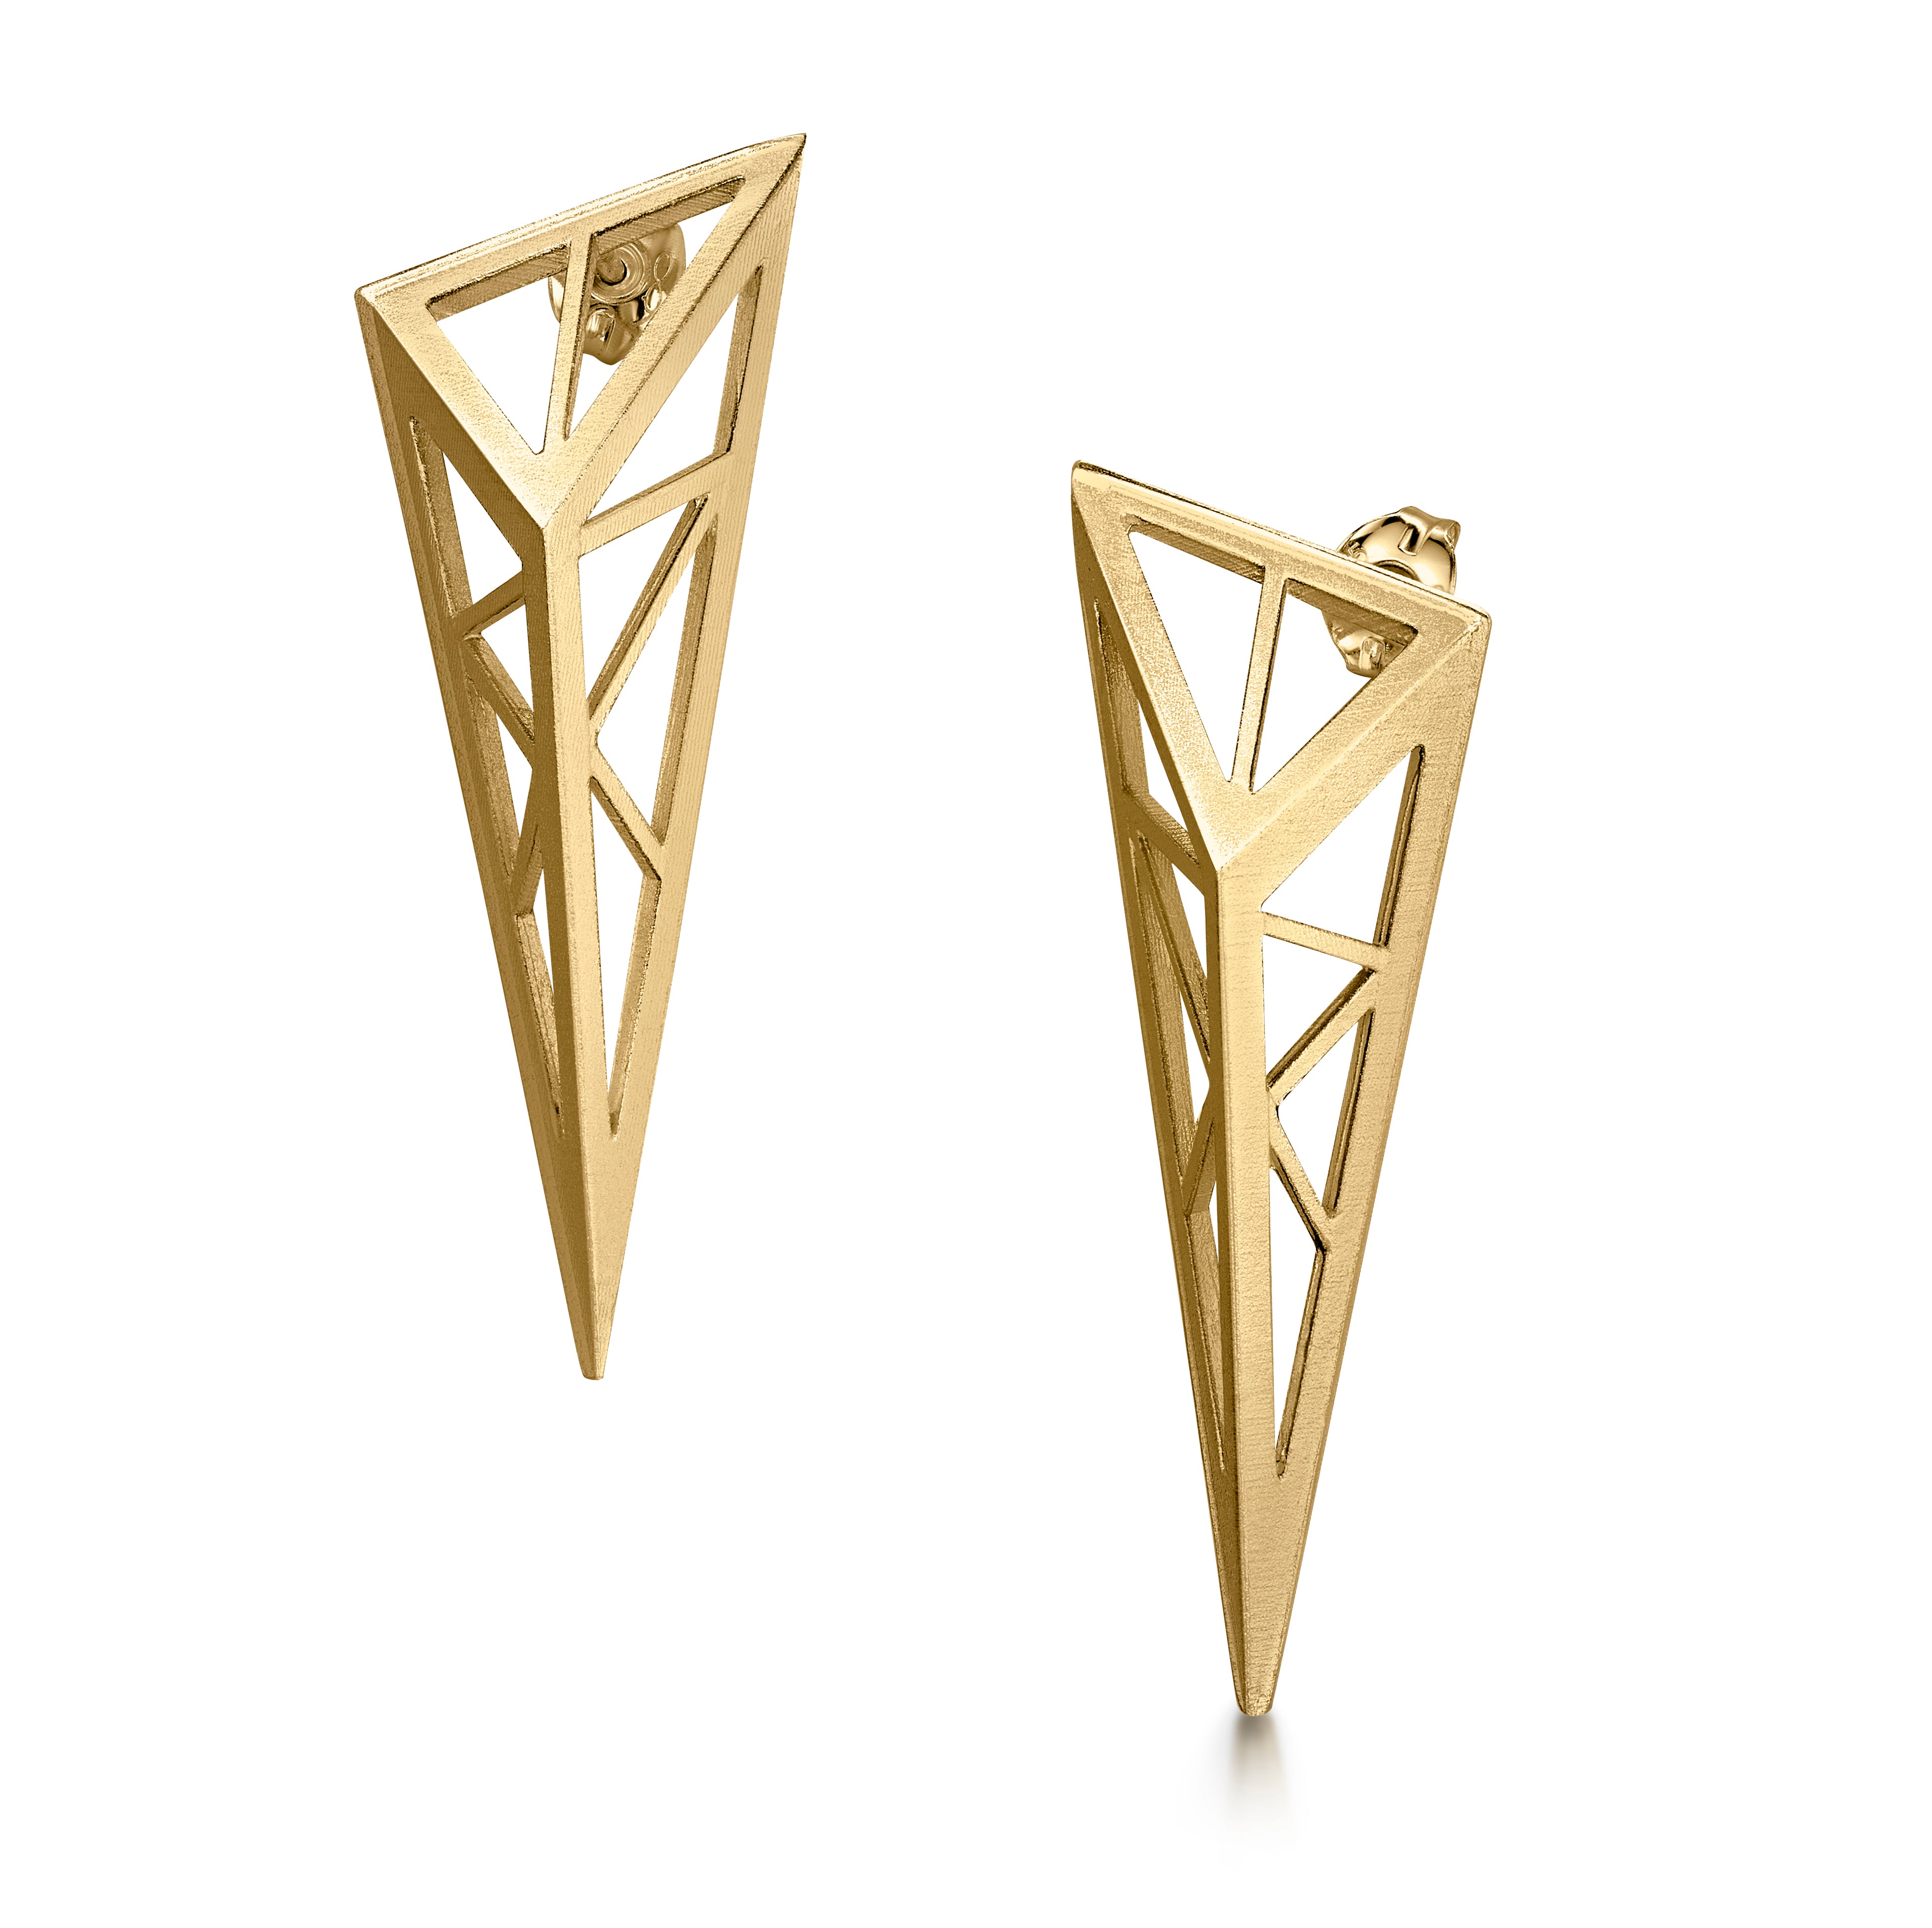 Forth Frame Earrings in 18ct Gold